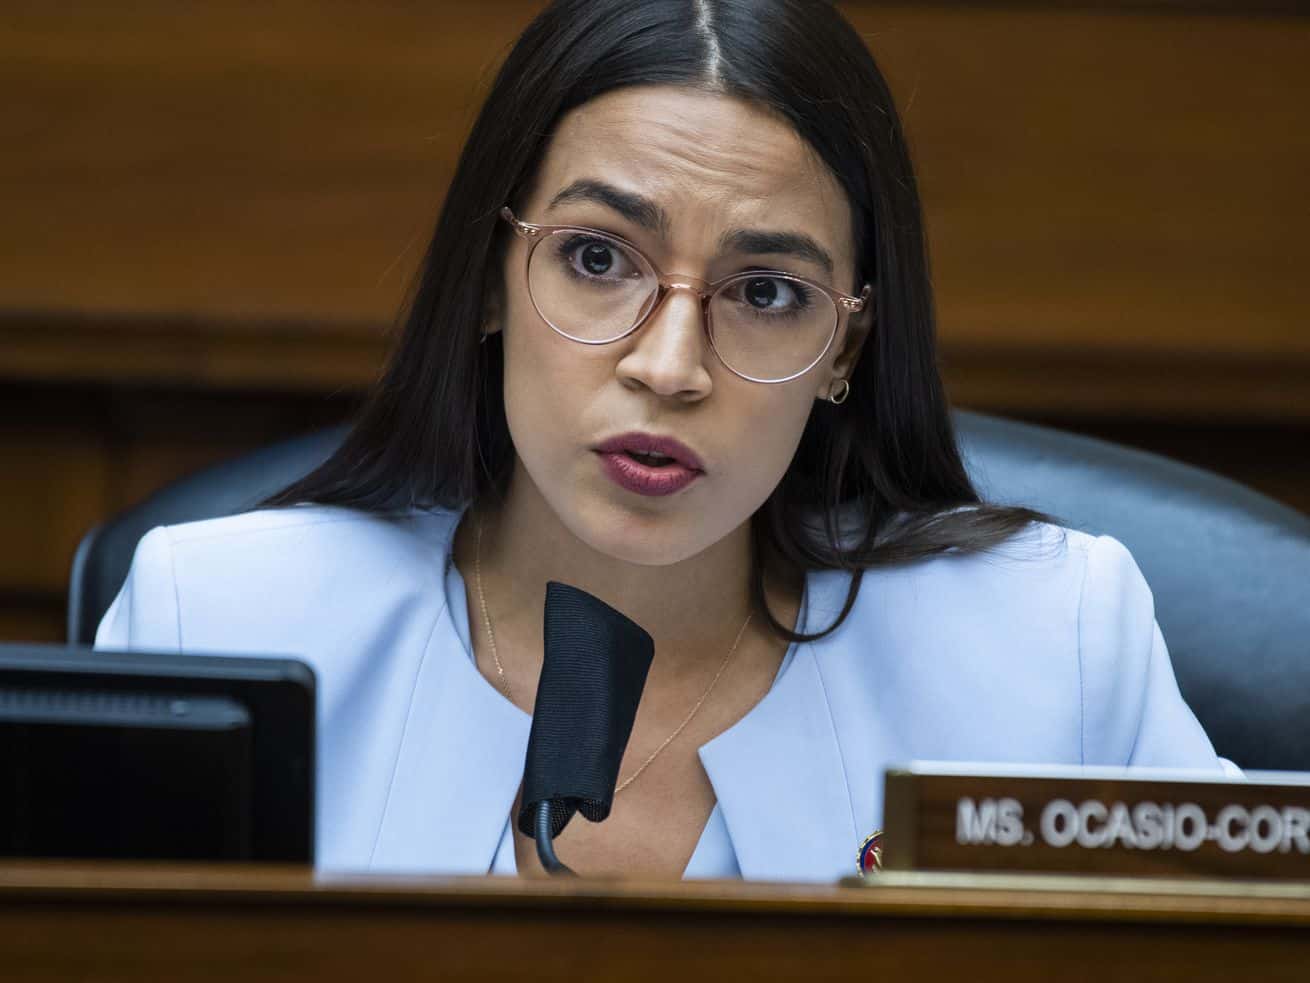 Why comparing Marjorie Taylor Greene to AOC is ridiculous